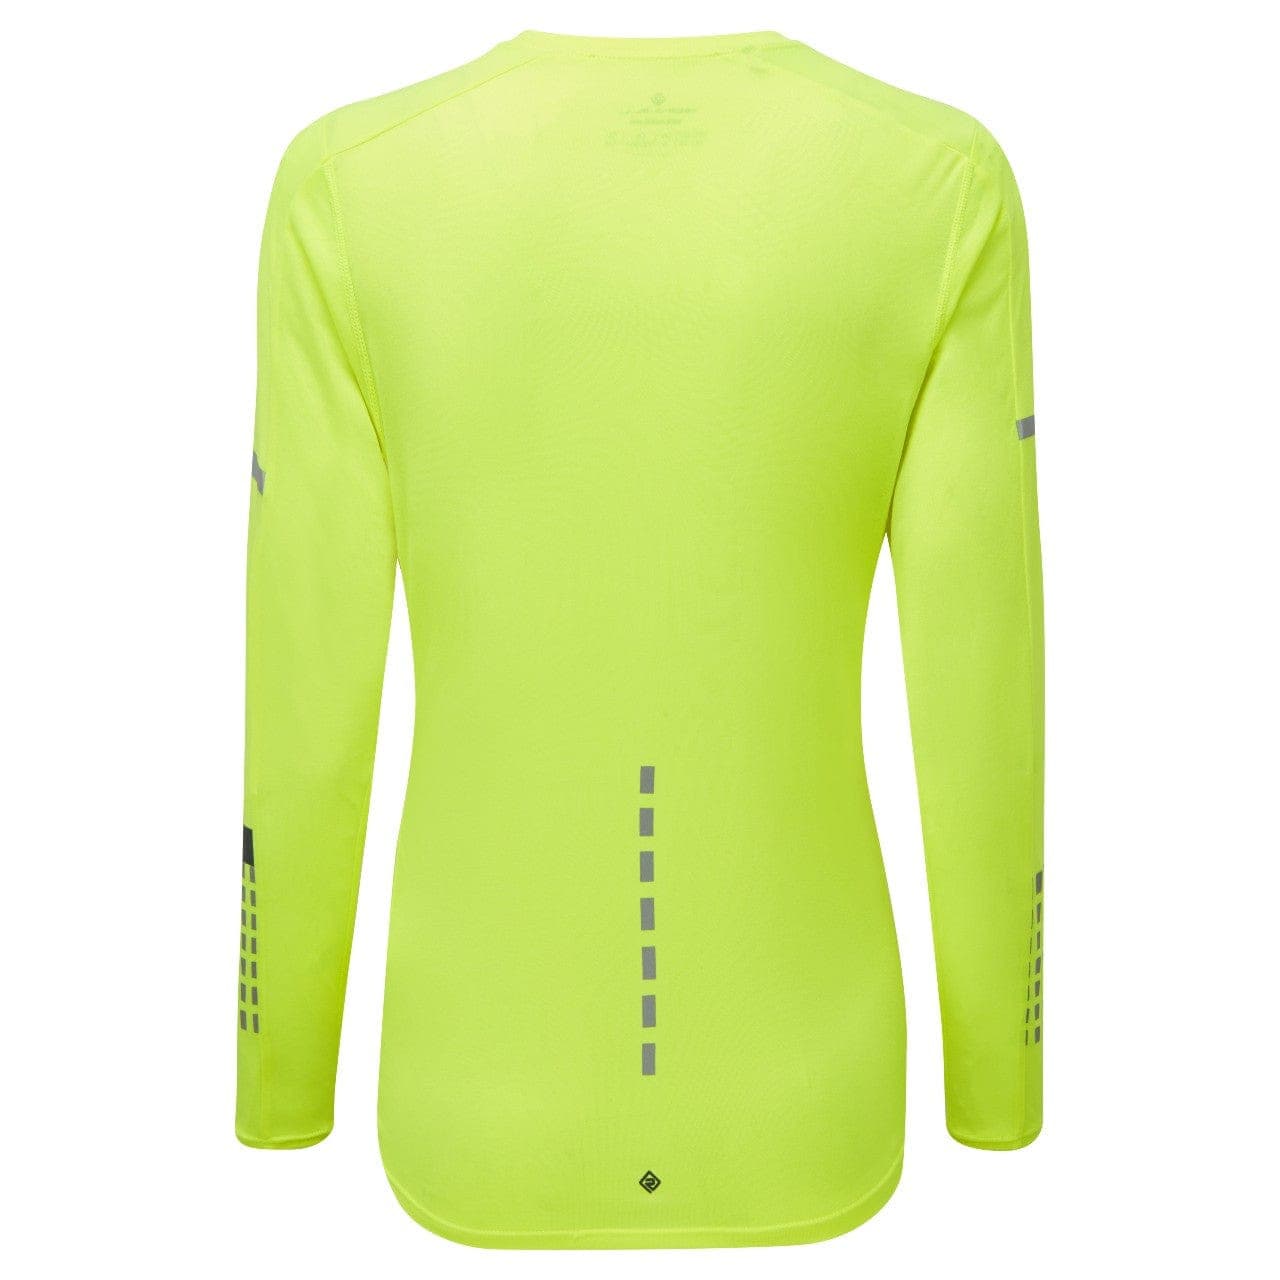 Ronhill Tech Afterhours L/S Tee (Womens) - Fluo Yellow/Charcoal/Reflective